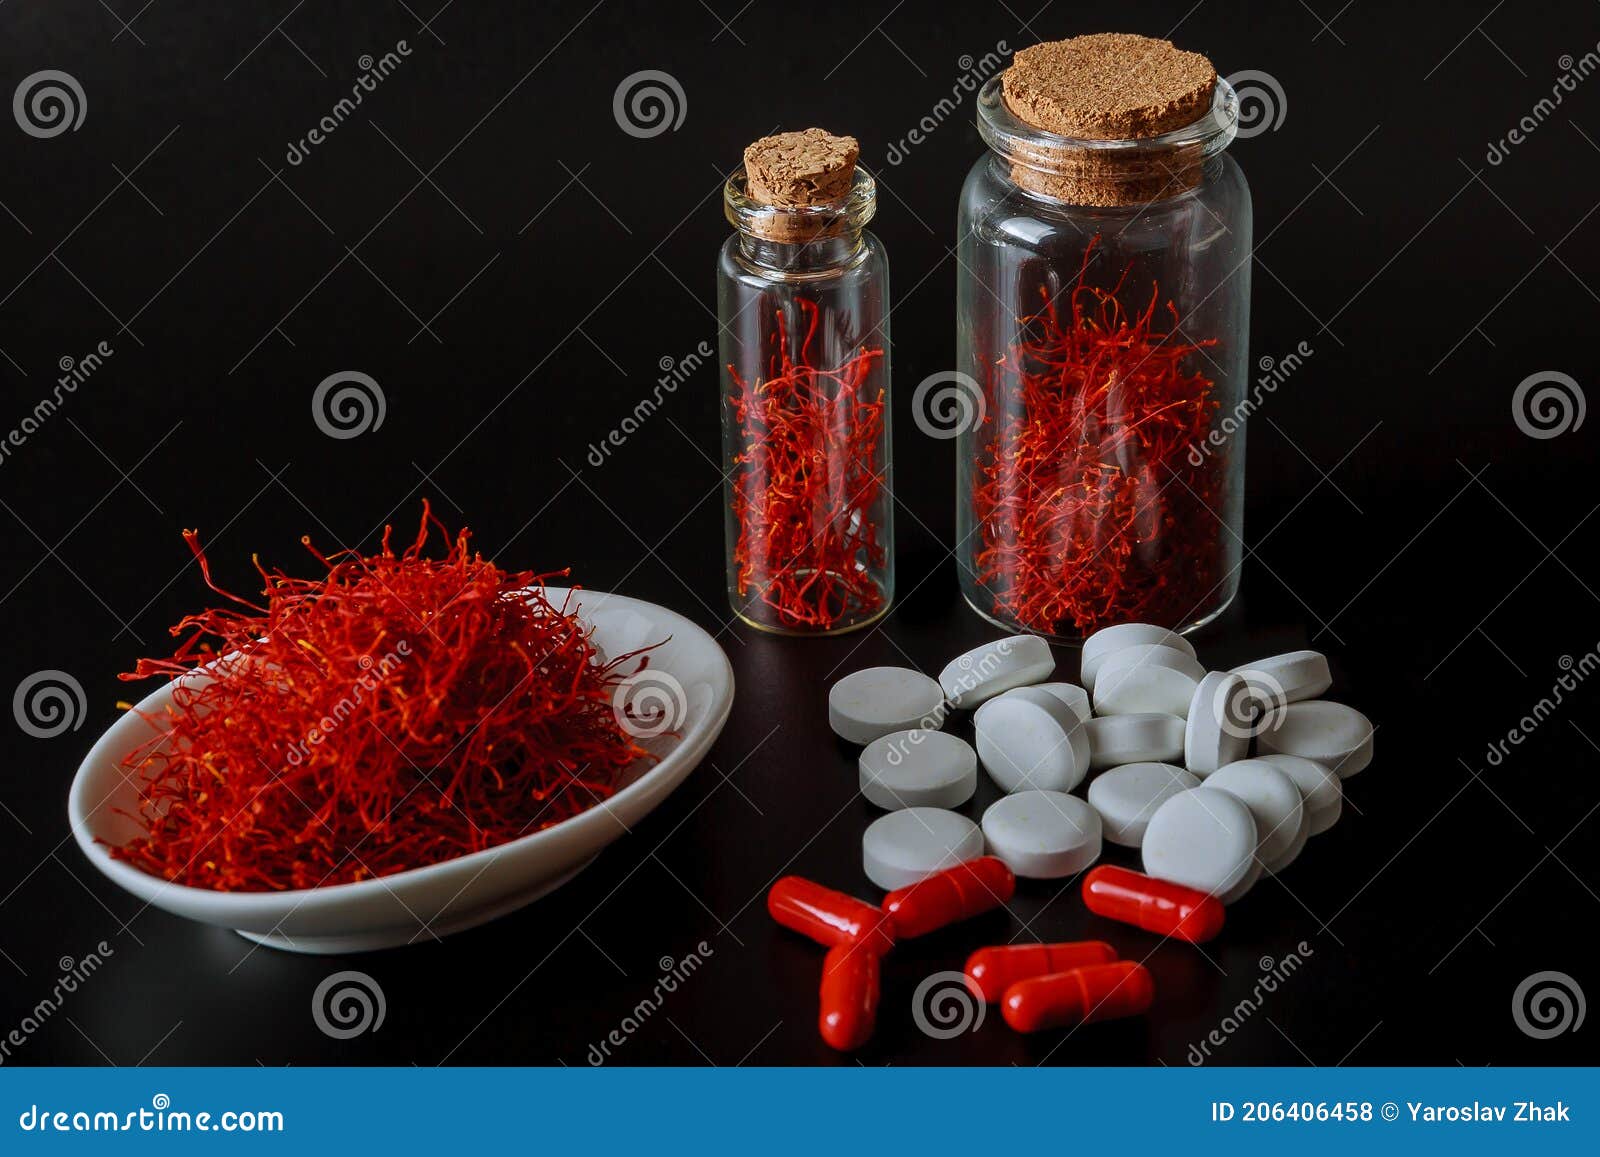 dry saffron threads and pills on a white background. the use of saffron in medicine